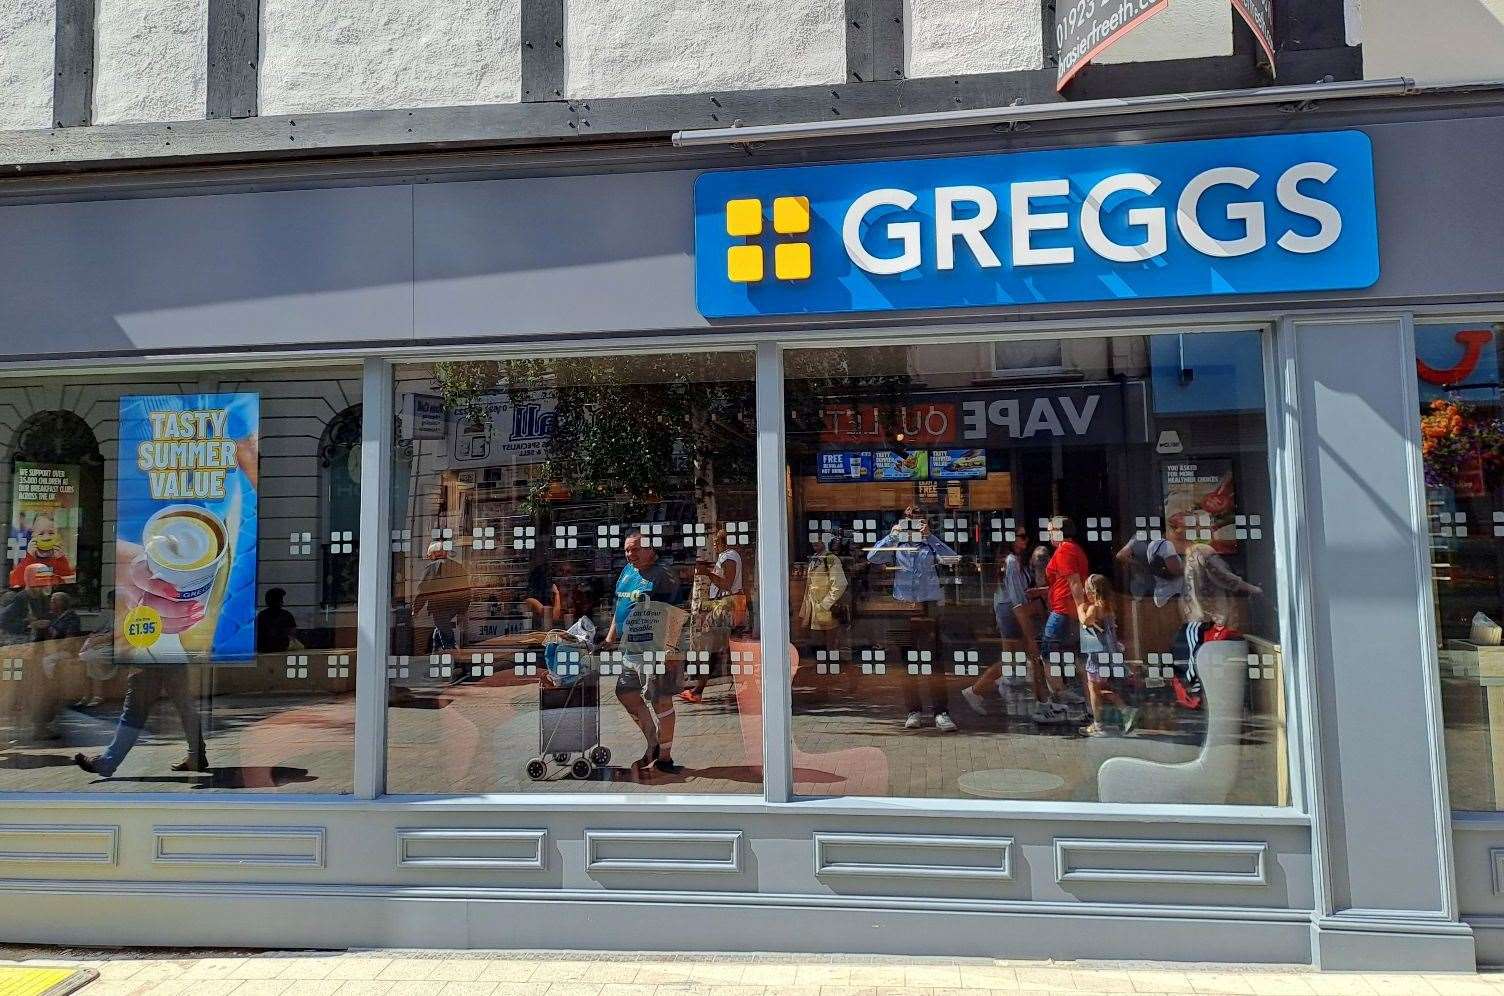 The new Greggs store in Maidstone opened at the weekend